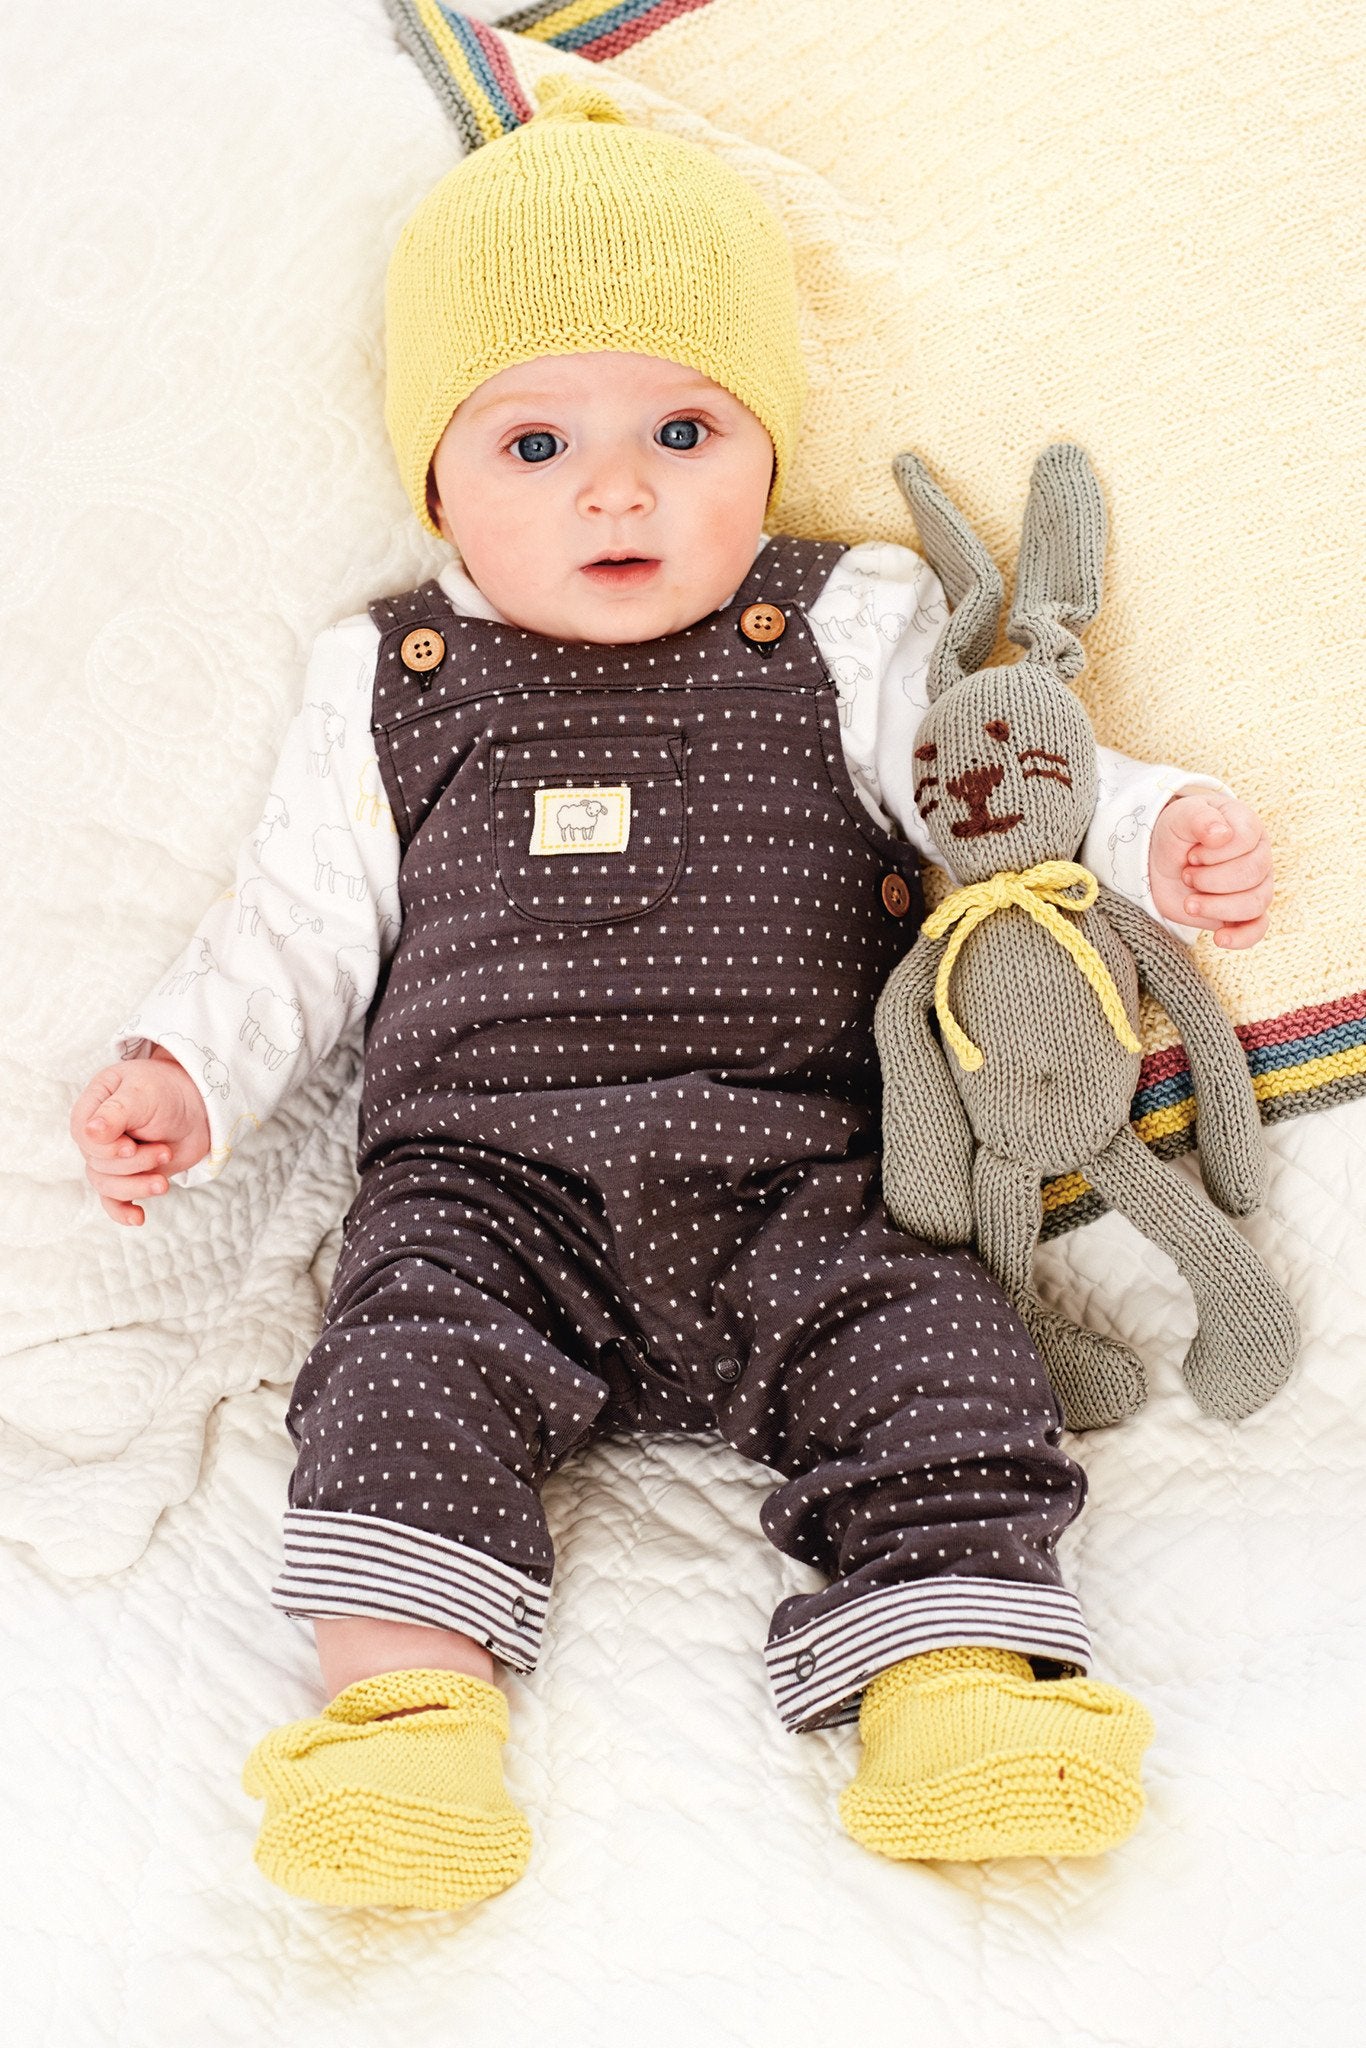 Baby Clothes, Toy And Blanket Set Knitting Patterns – The Knitting Network